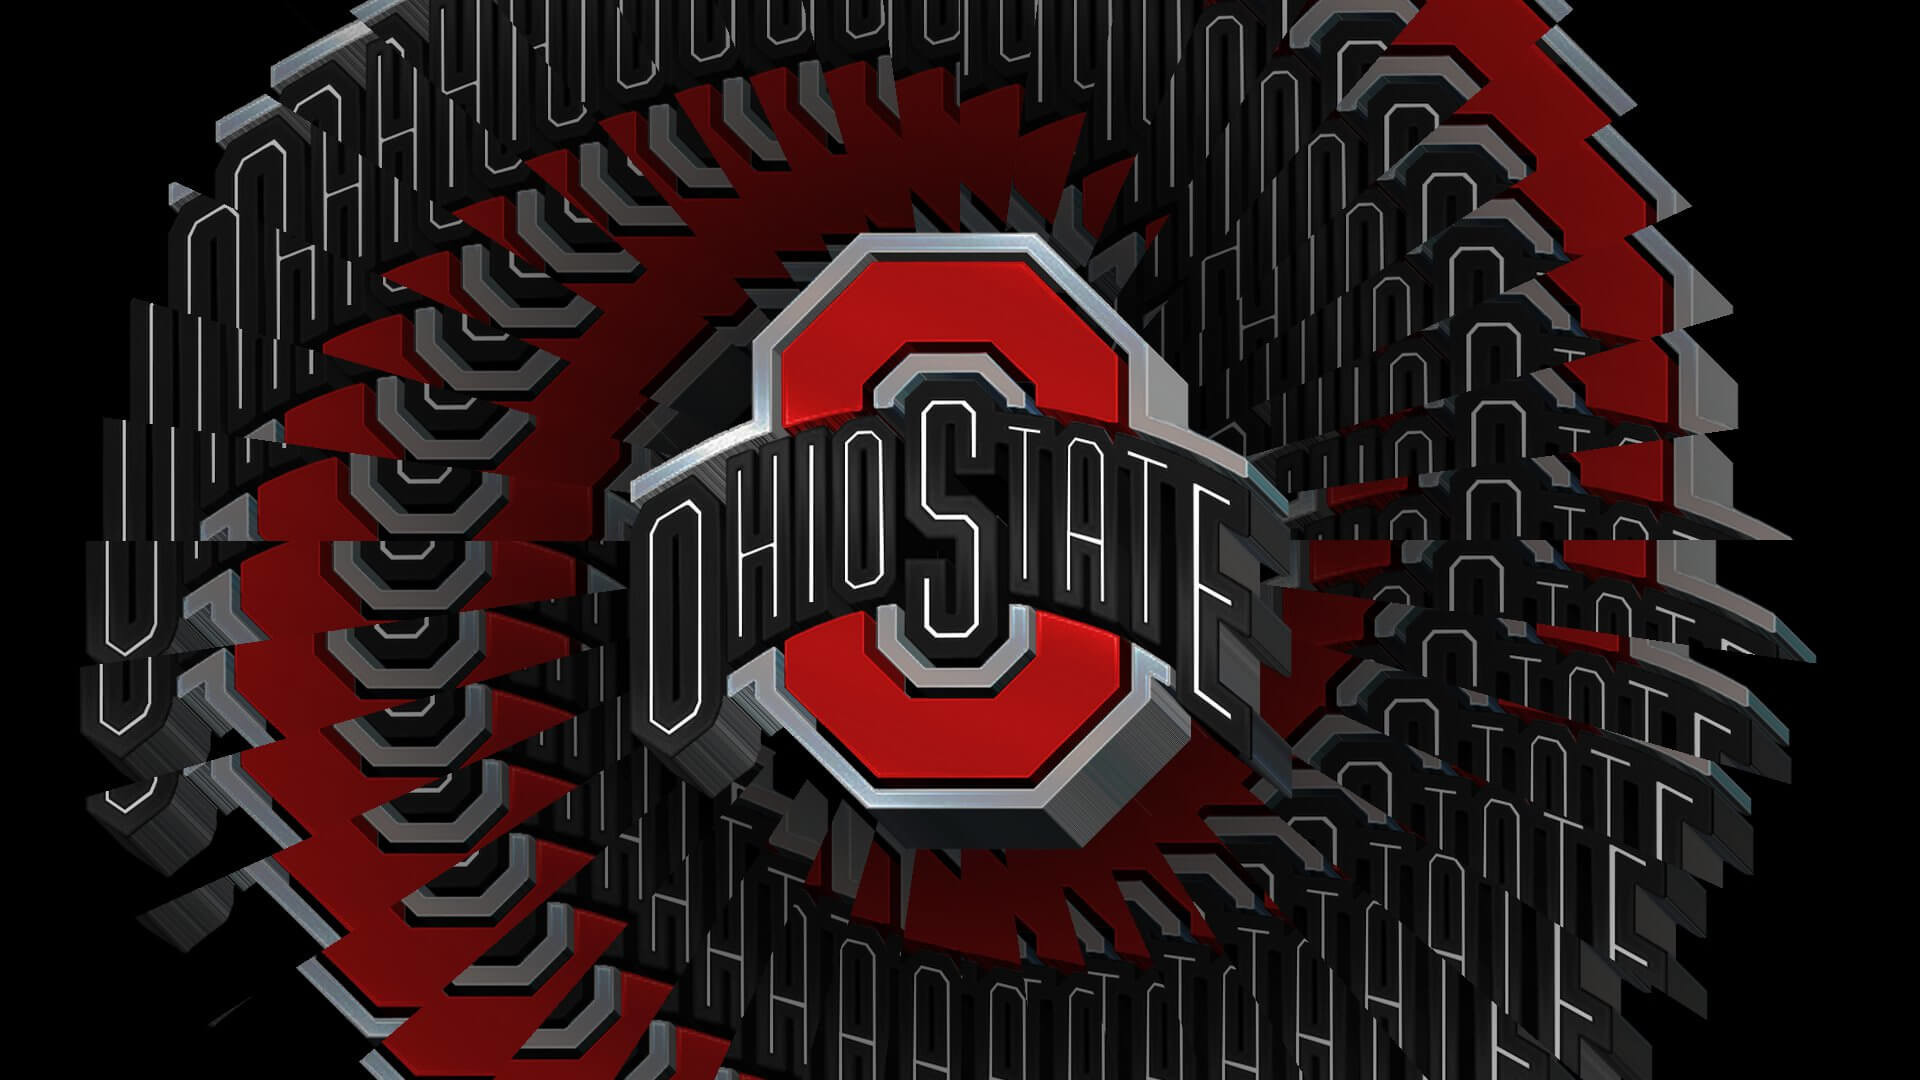 1920x1080 Ohio state Wallpapers for iPad